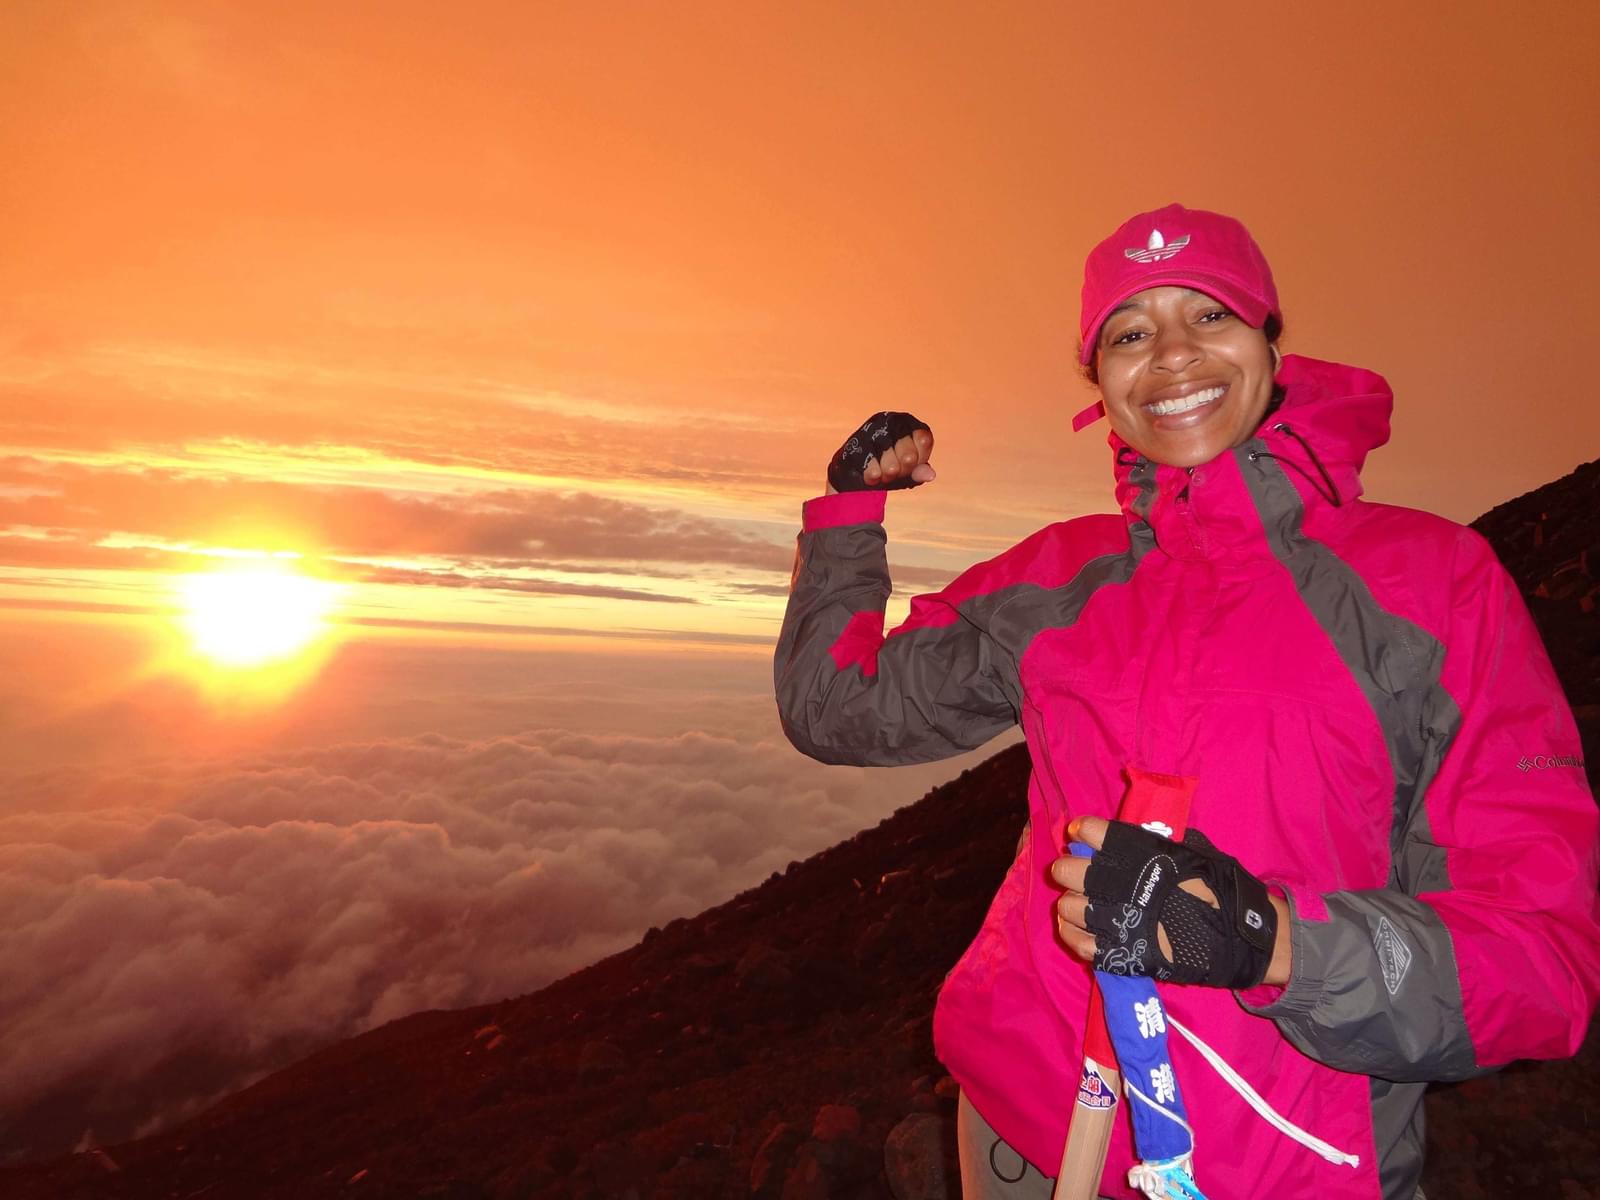 Elyce Middlebrooks posing in front of sun on summit of mountain